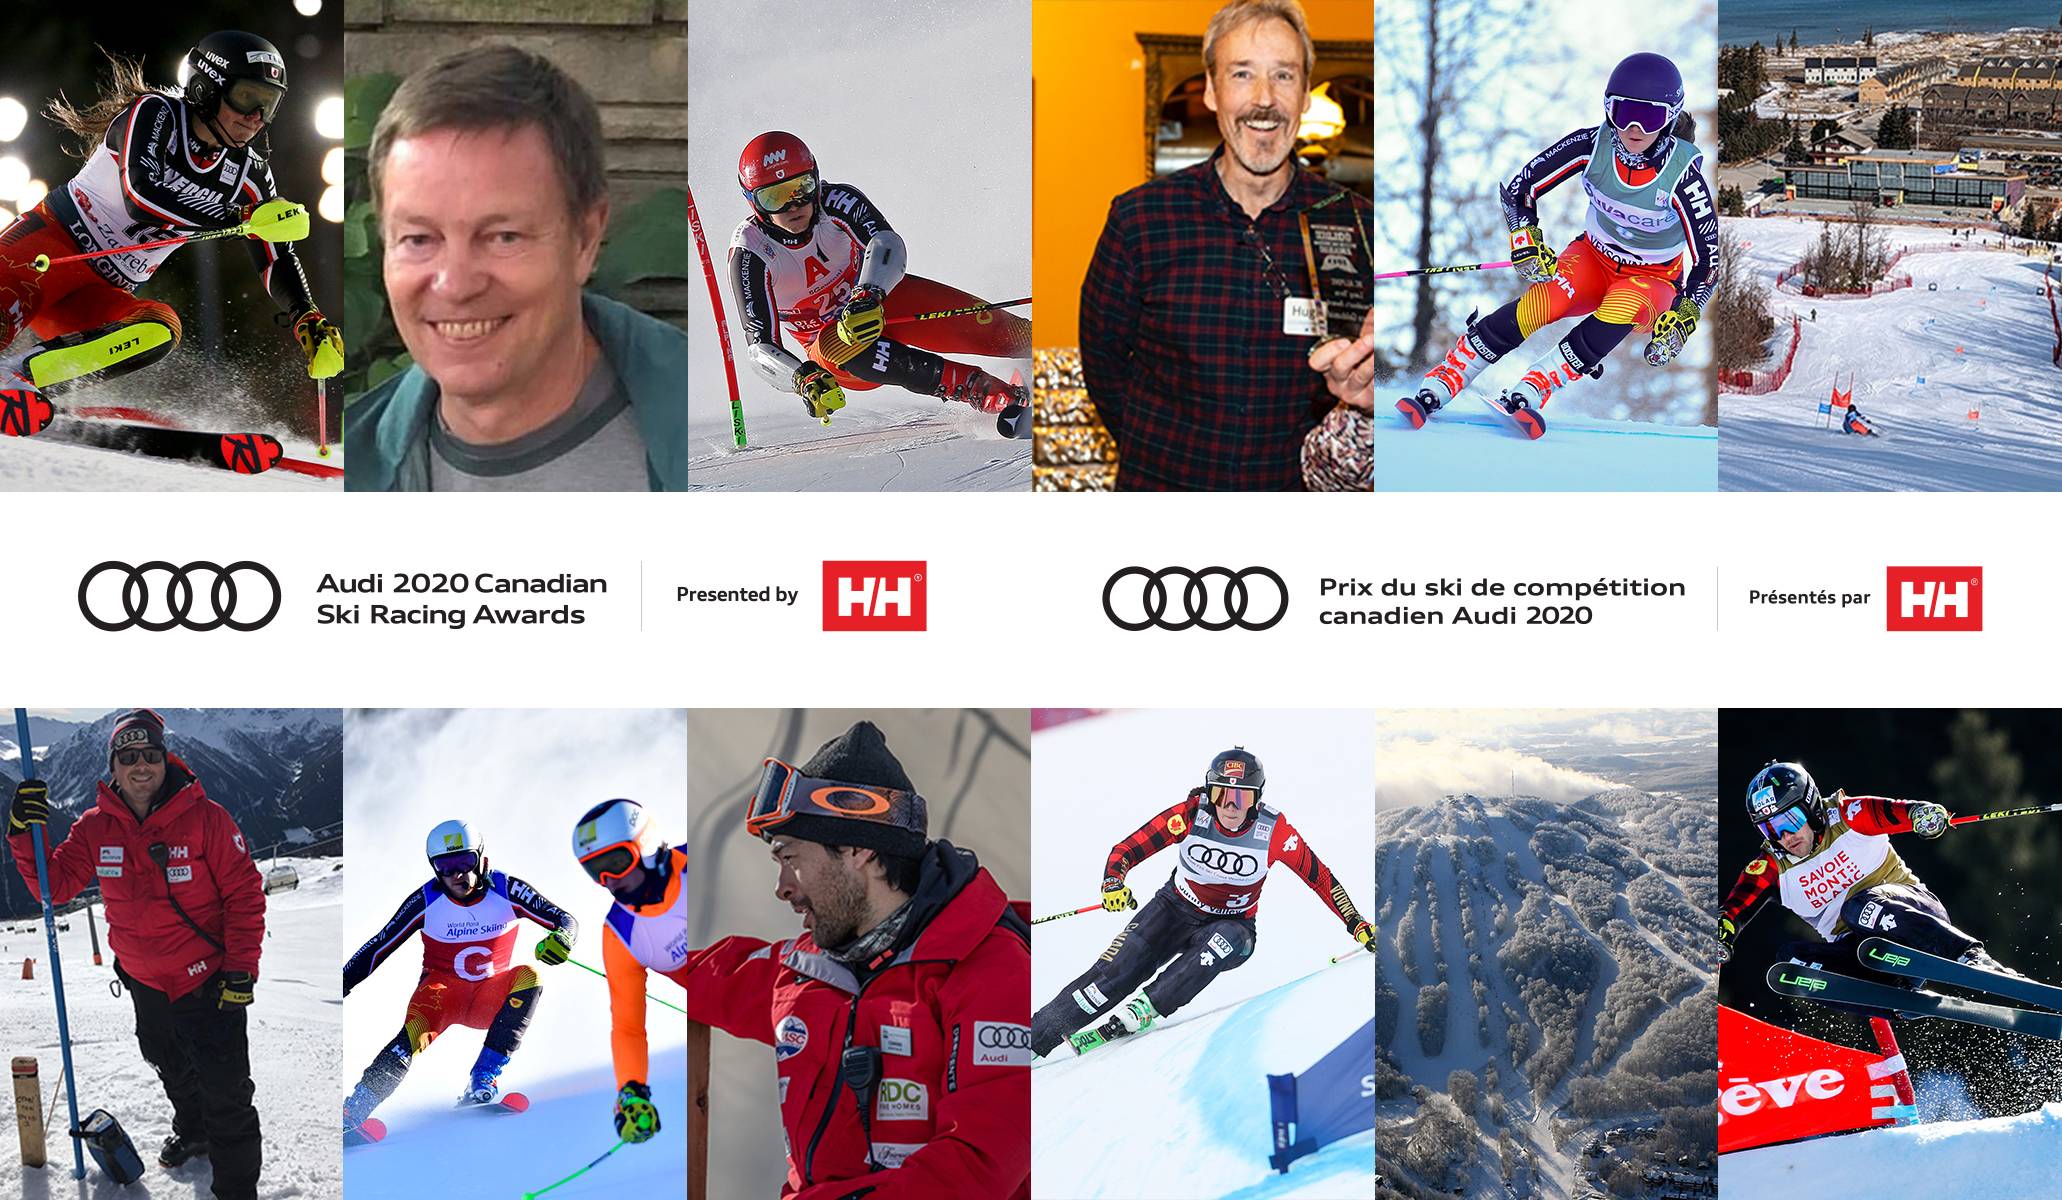 Winners announced for Audi 2020 Canadian Ski Racing Awards Presented by Helly Hansen